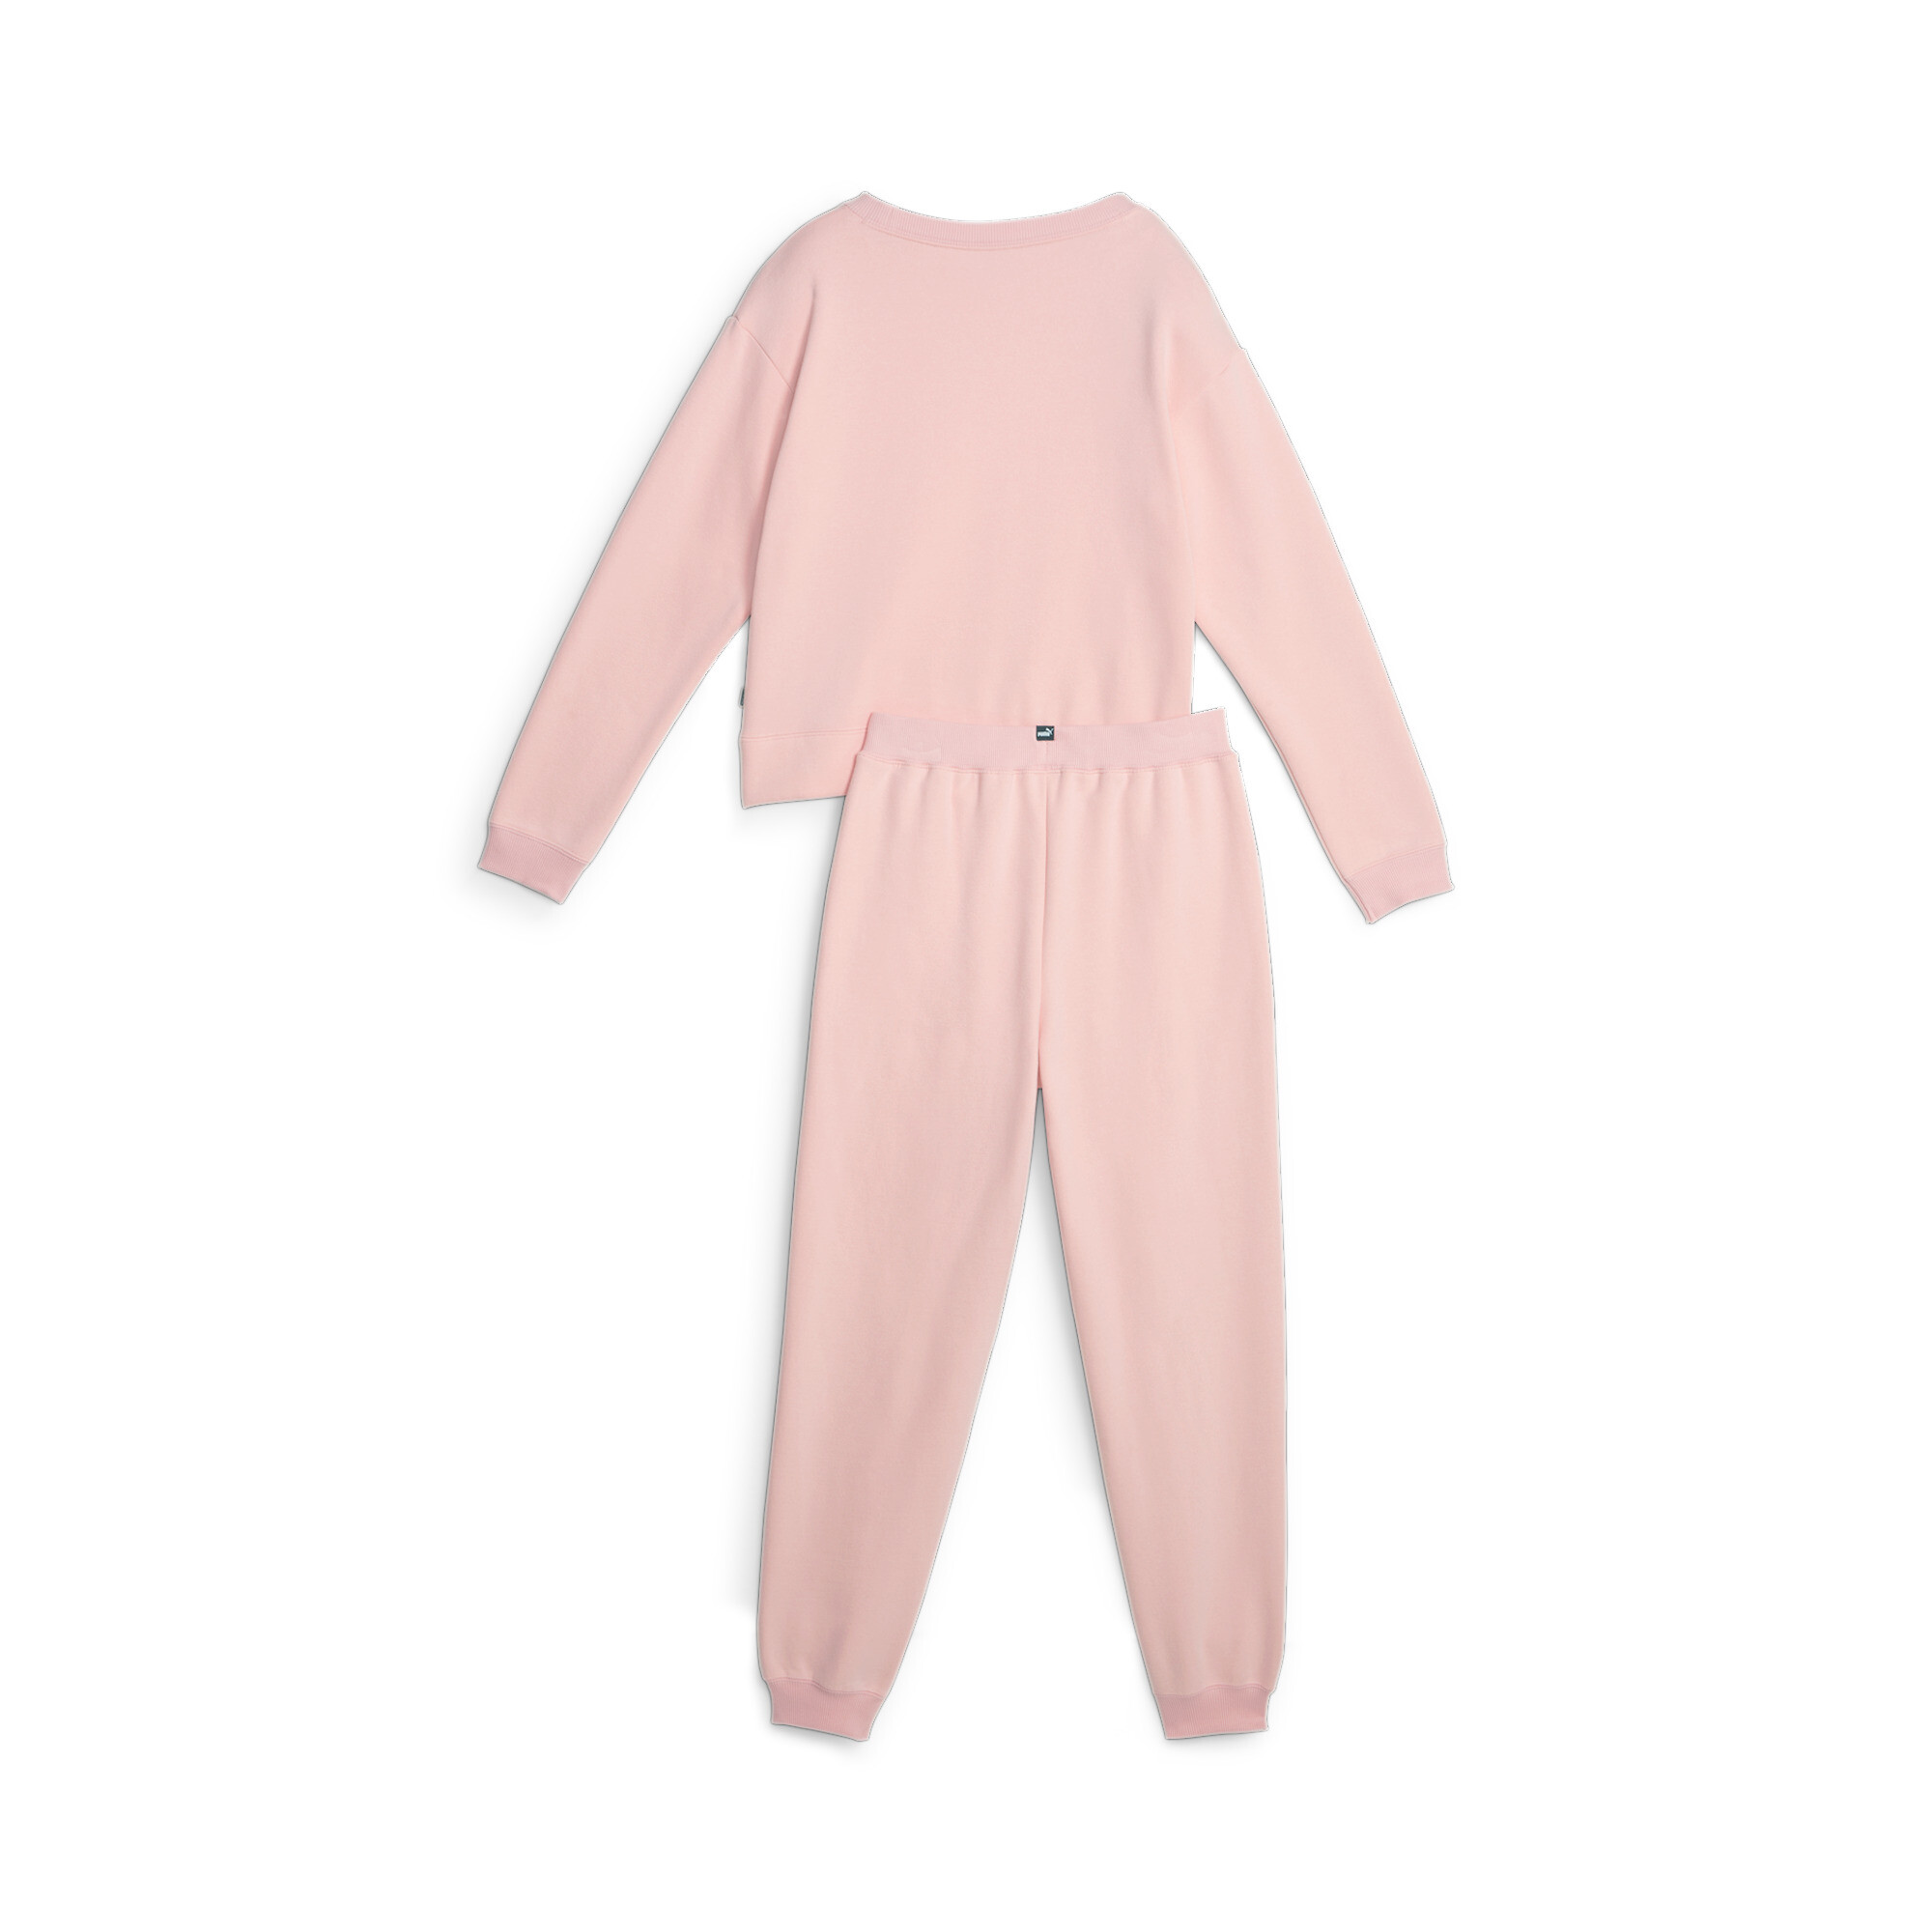 Women's Puma Loungewear Suit Youth, Pink, Size 7-8Y, Clothing